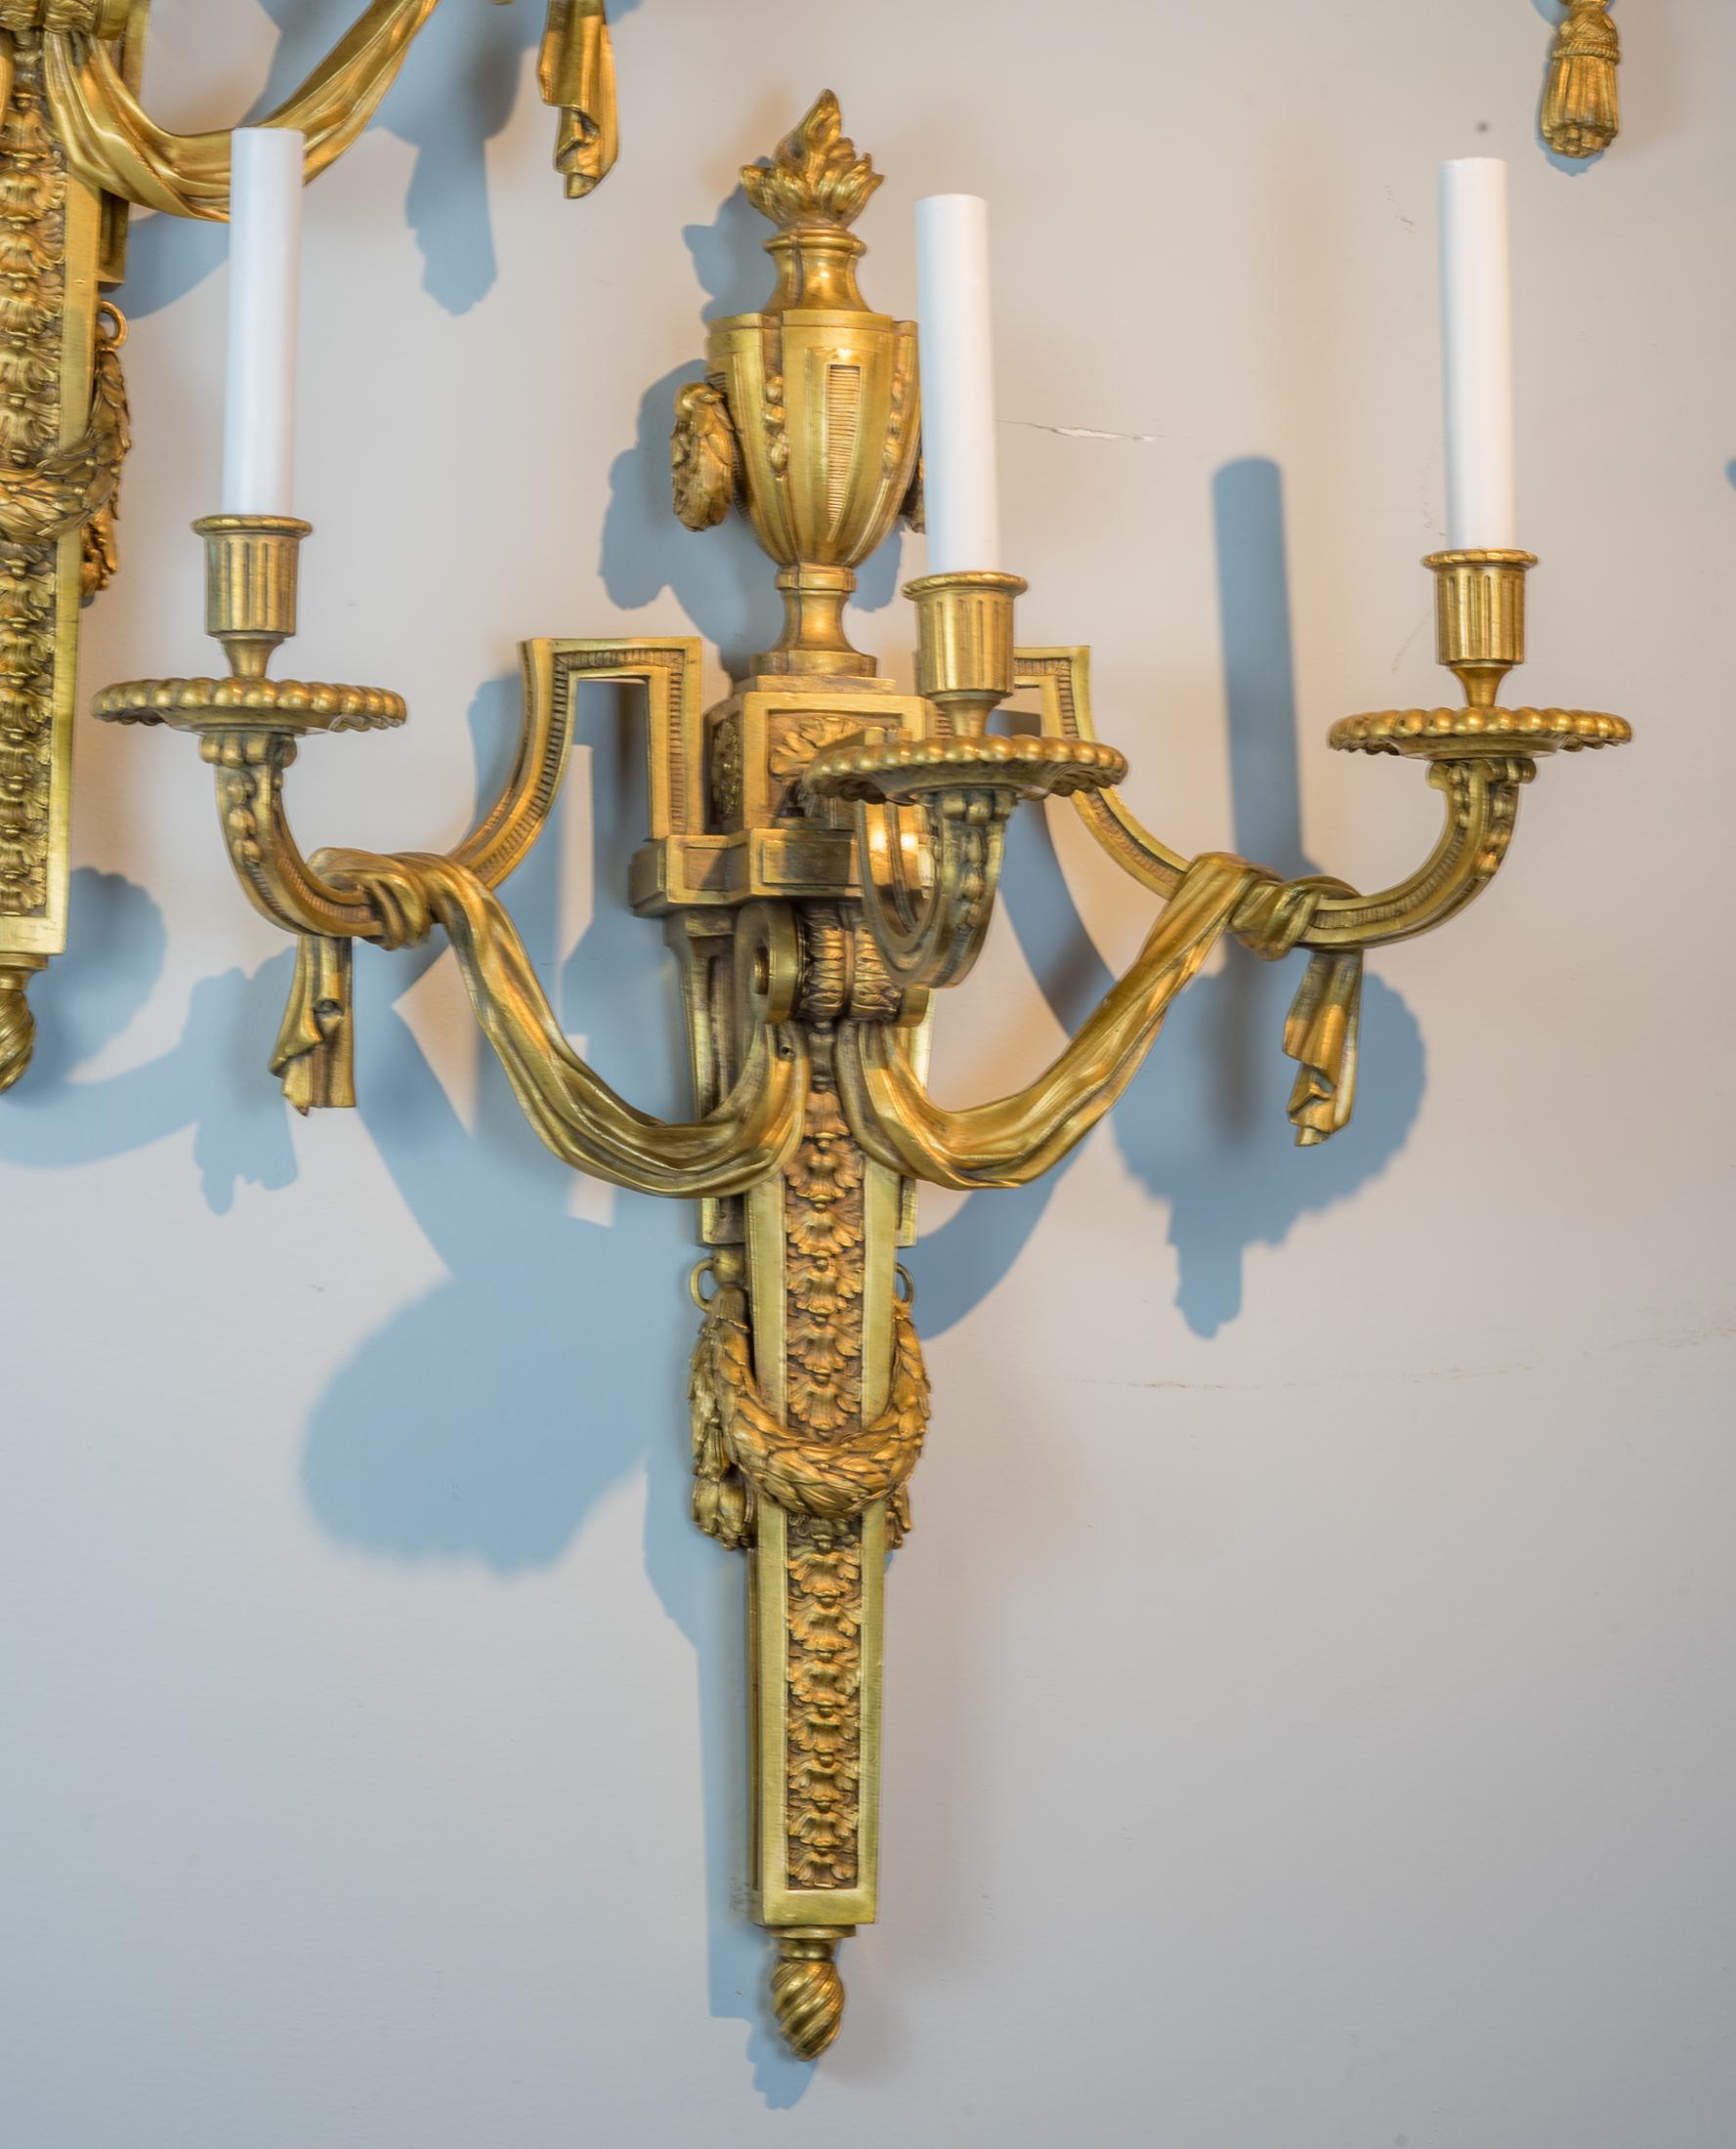 Fine quality pair of Louis XVI style gilt-bronze three-light sconces

Origin: French
Date: 19th century
Dimension: 25 1/2 in. x 20 1/2 in.